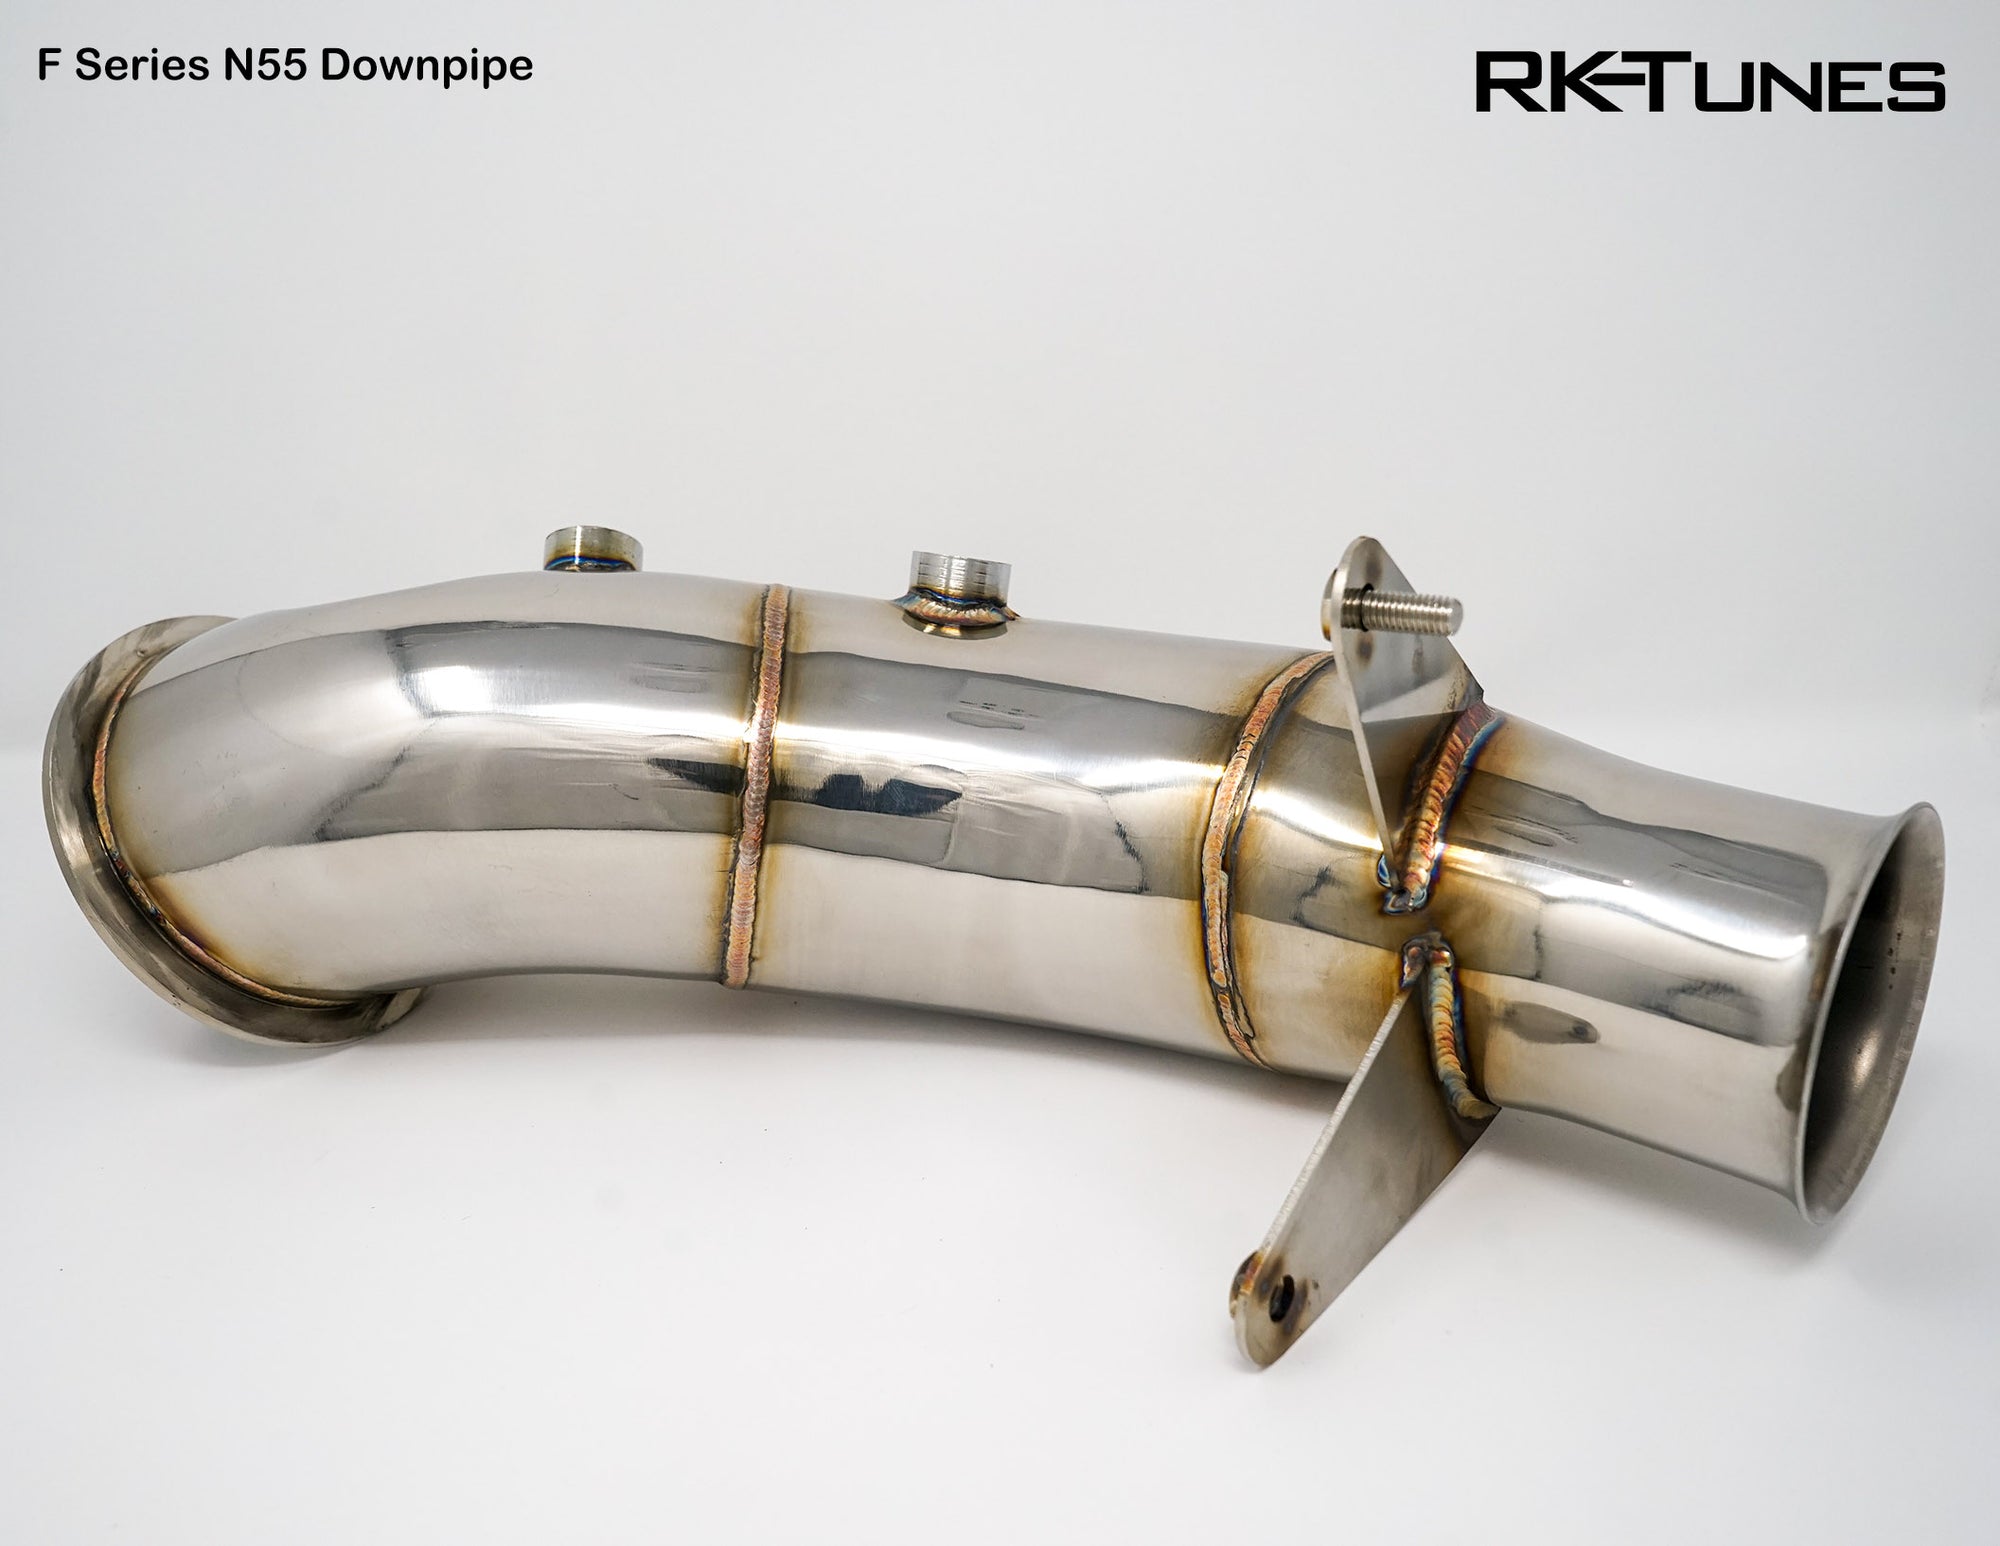 Performance Downpipe for F Series N55 BMW Decor